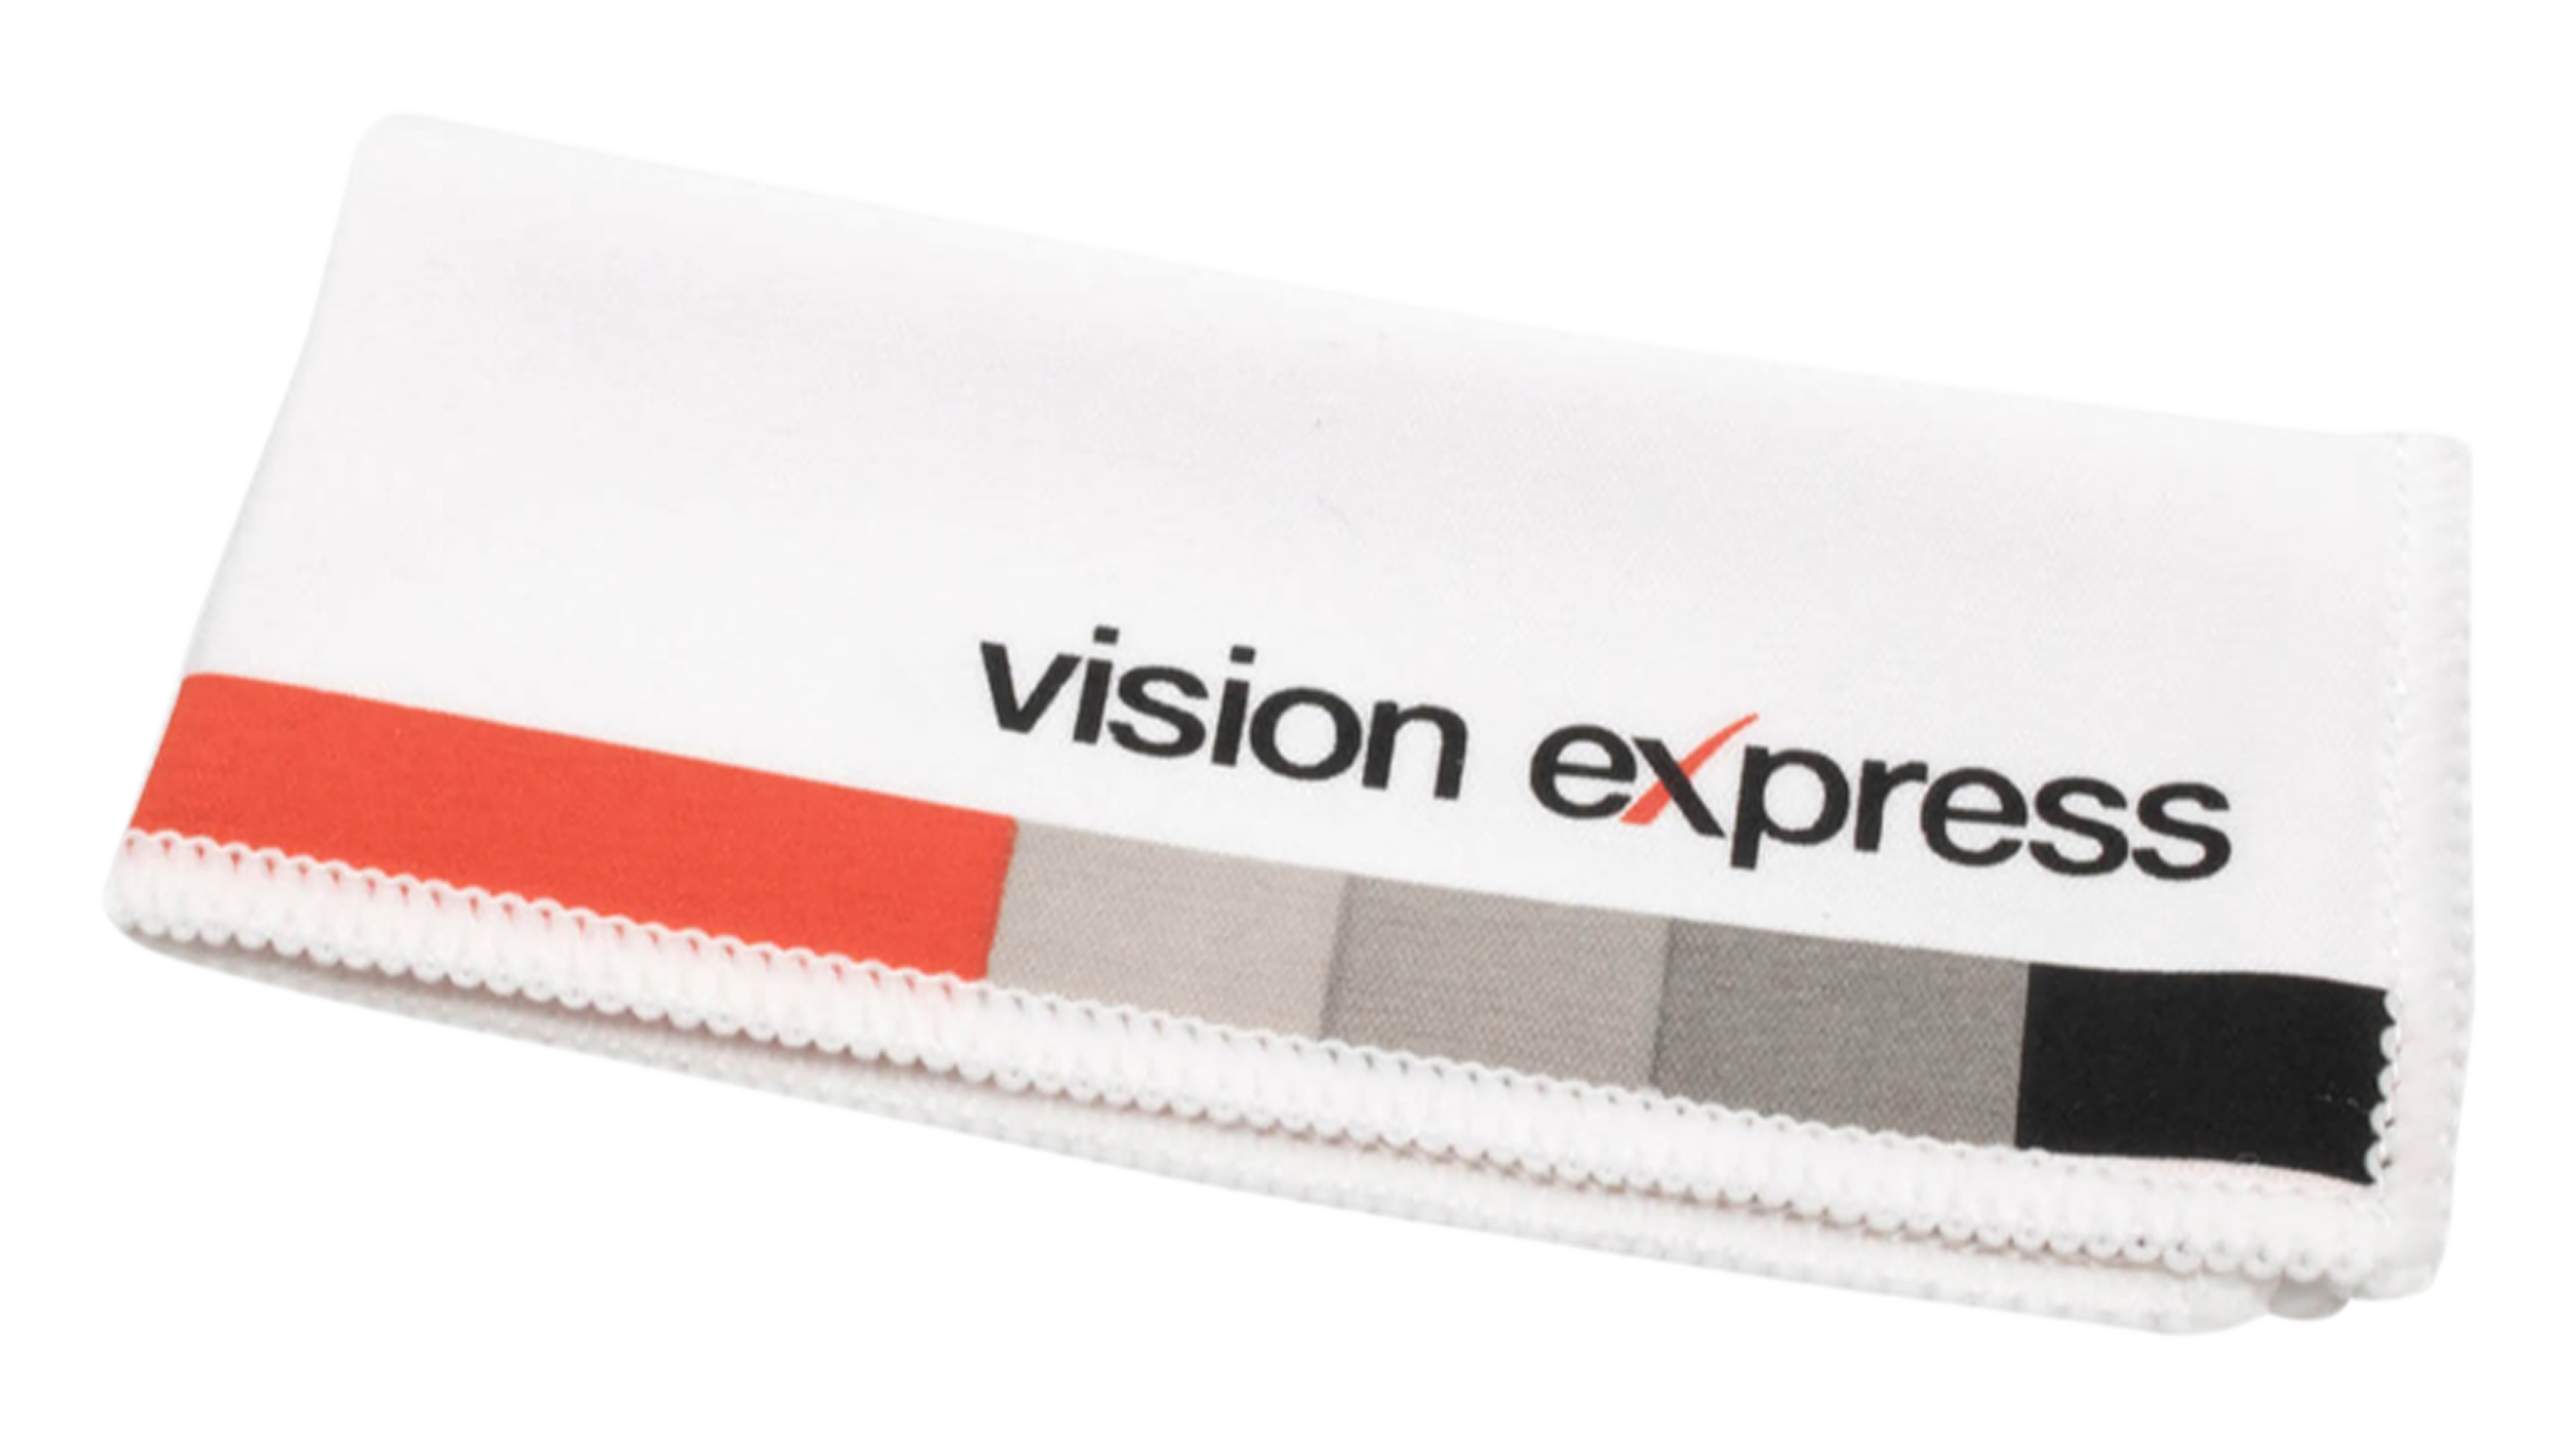 [products.image.front] Vision Express Glasses Lens Microfibre Lens Cleaning Cloth